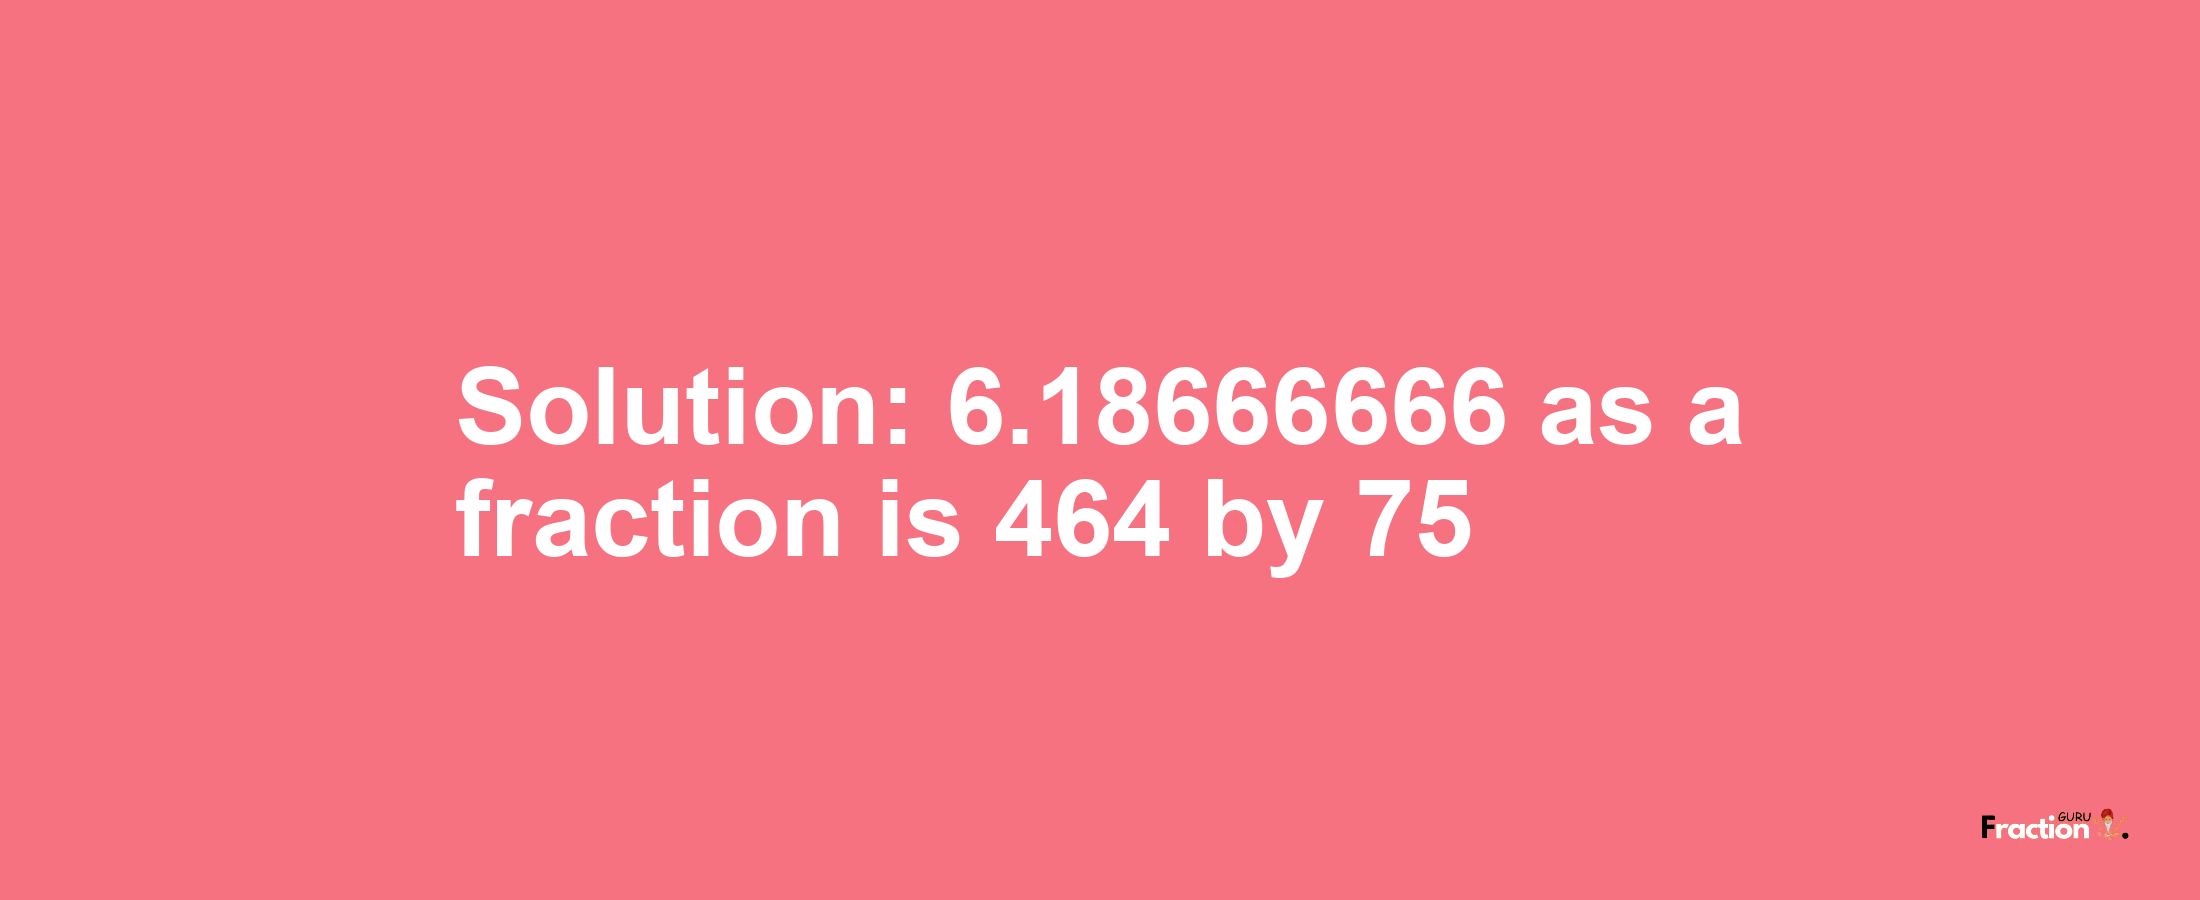 Solution:6.18666666 as a fraction is 464/75